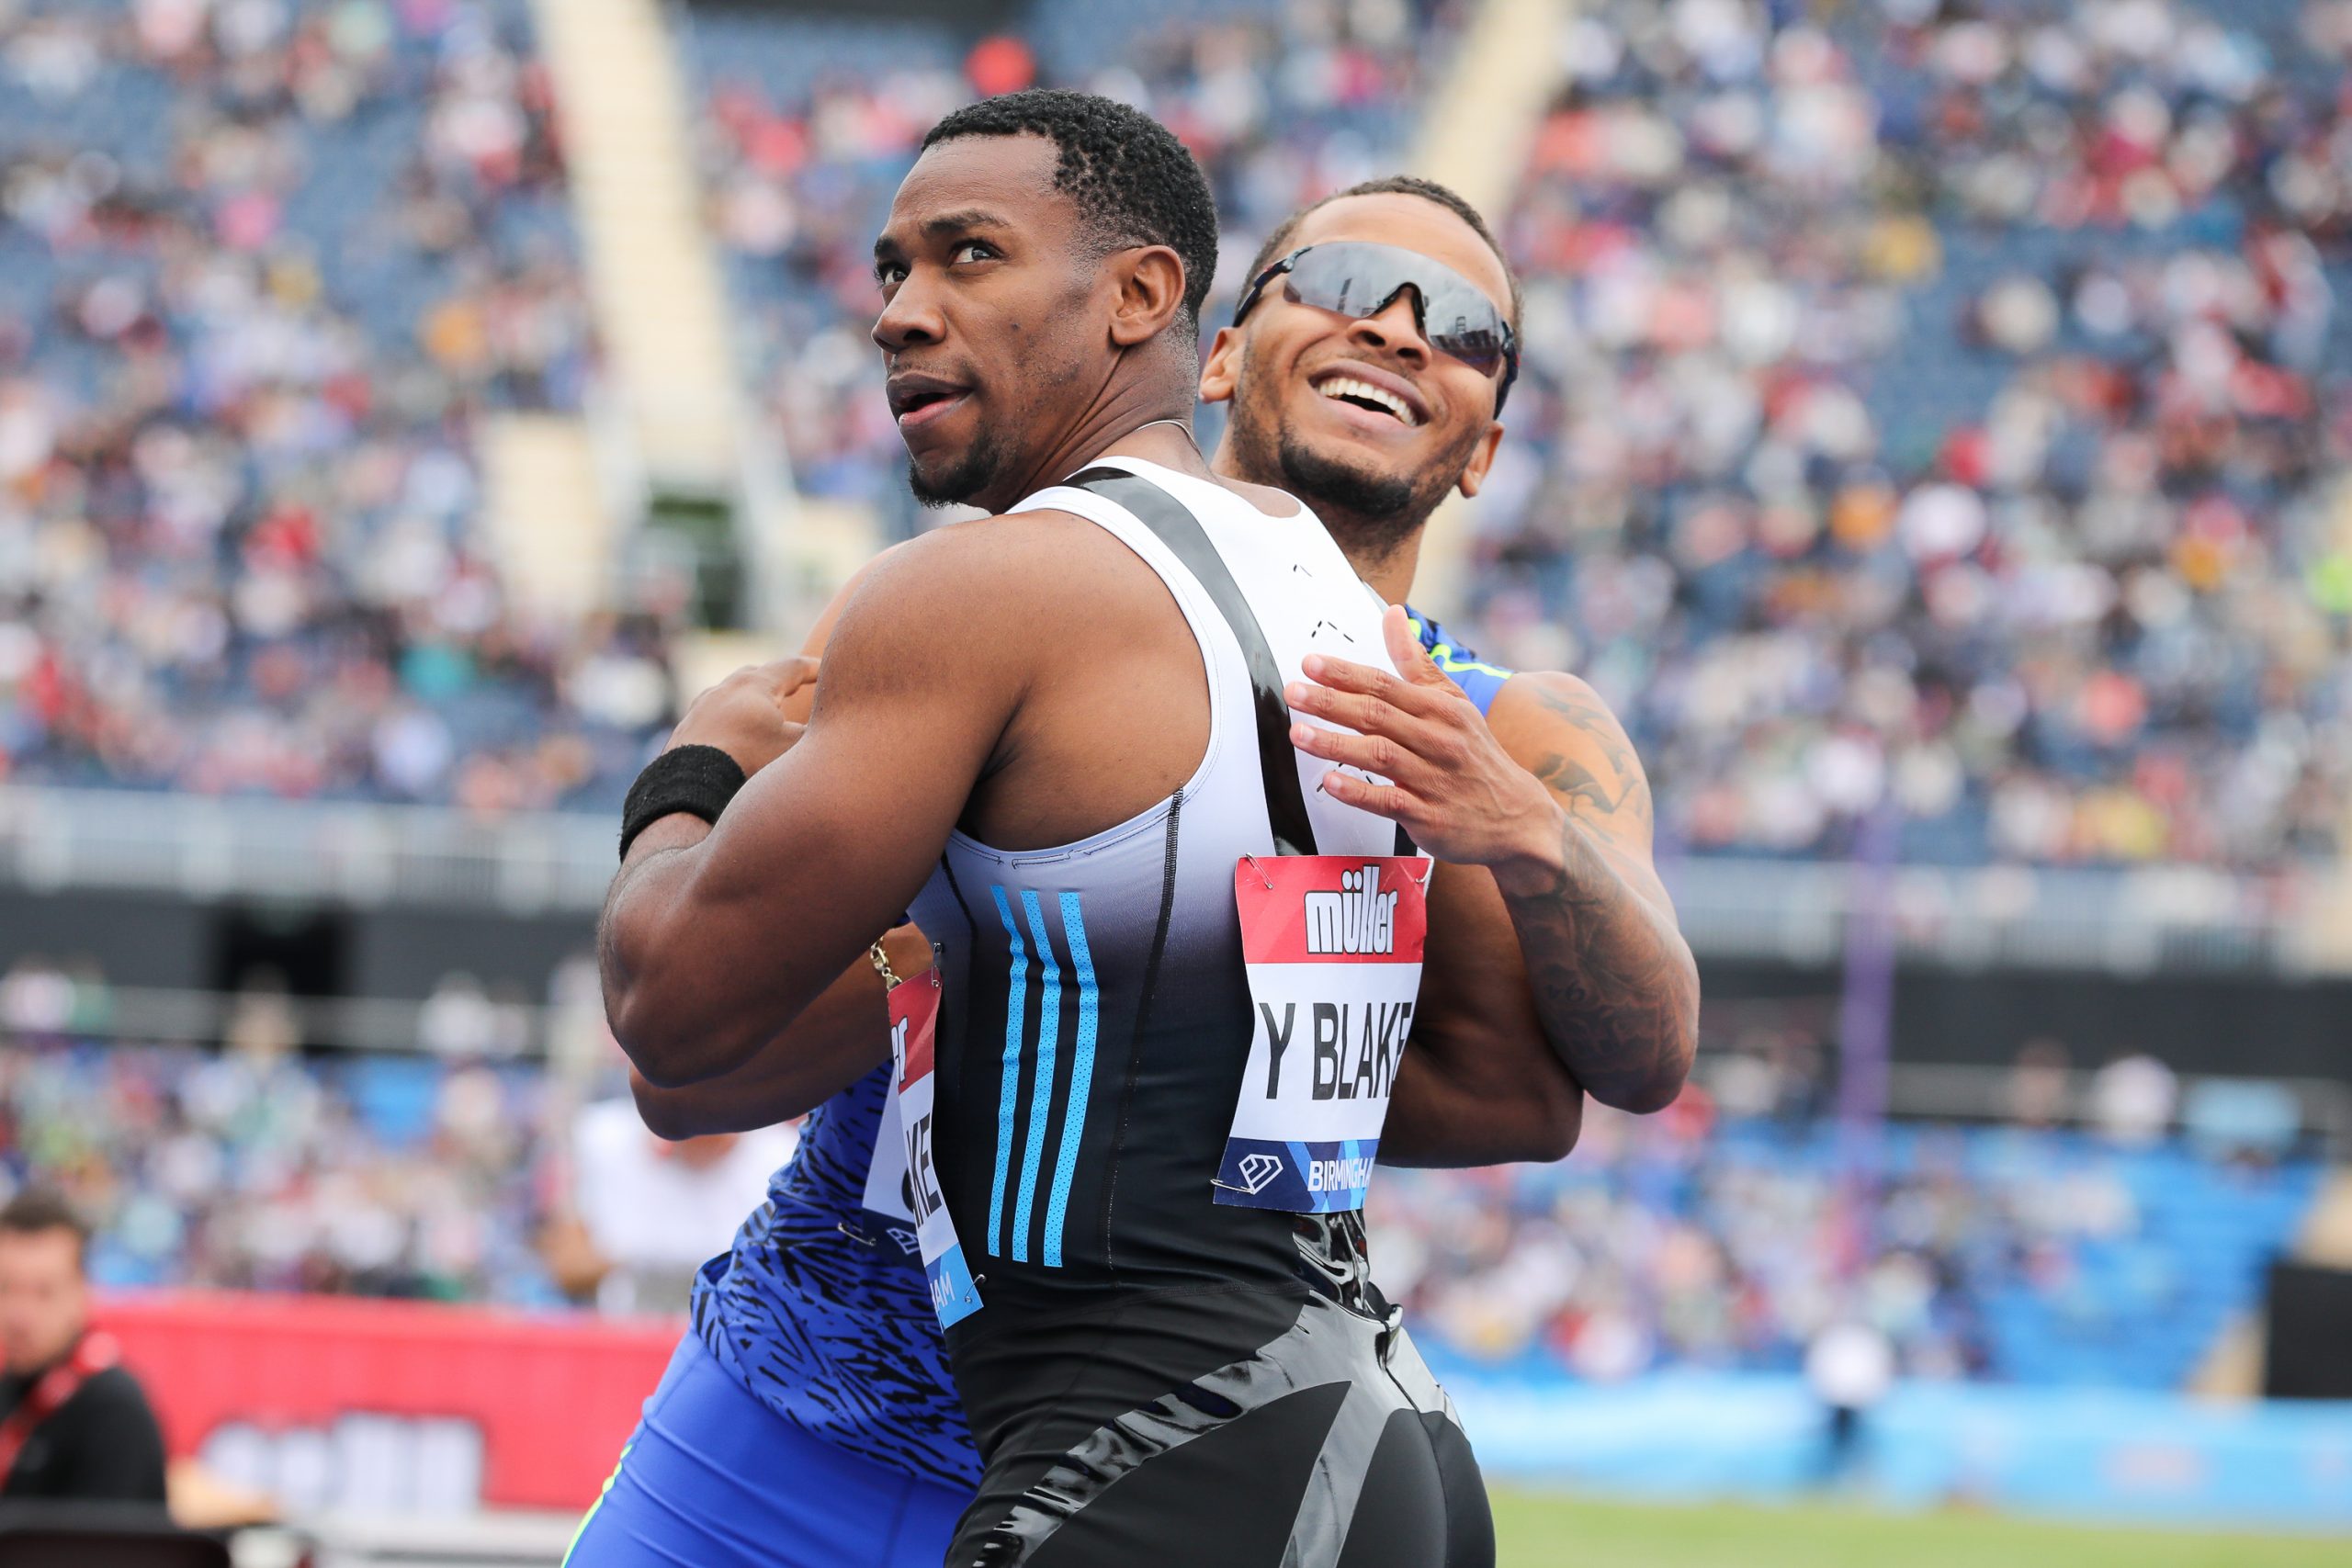 Jamaicas's Yohan Blake with Canada's Aaron Brown